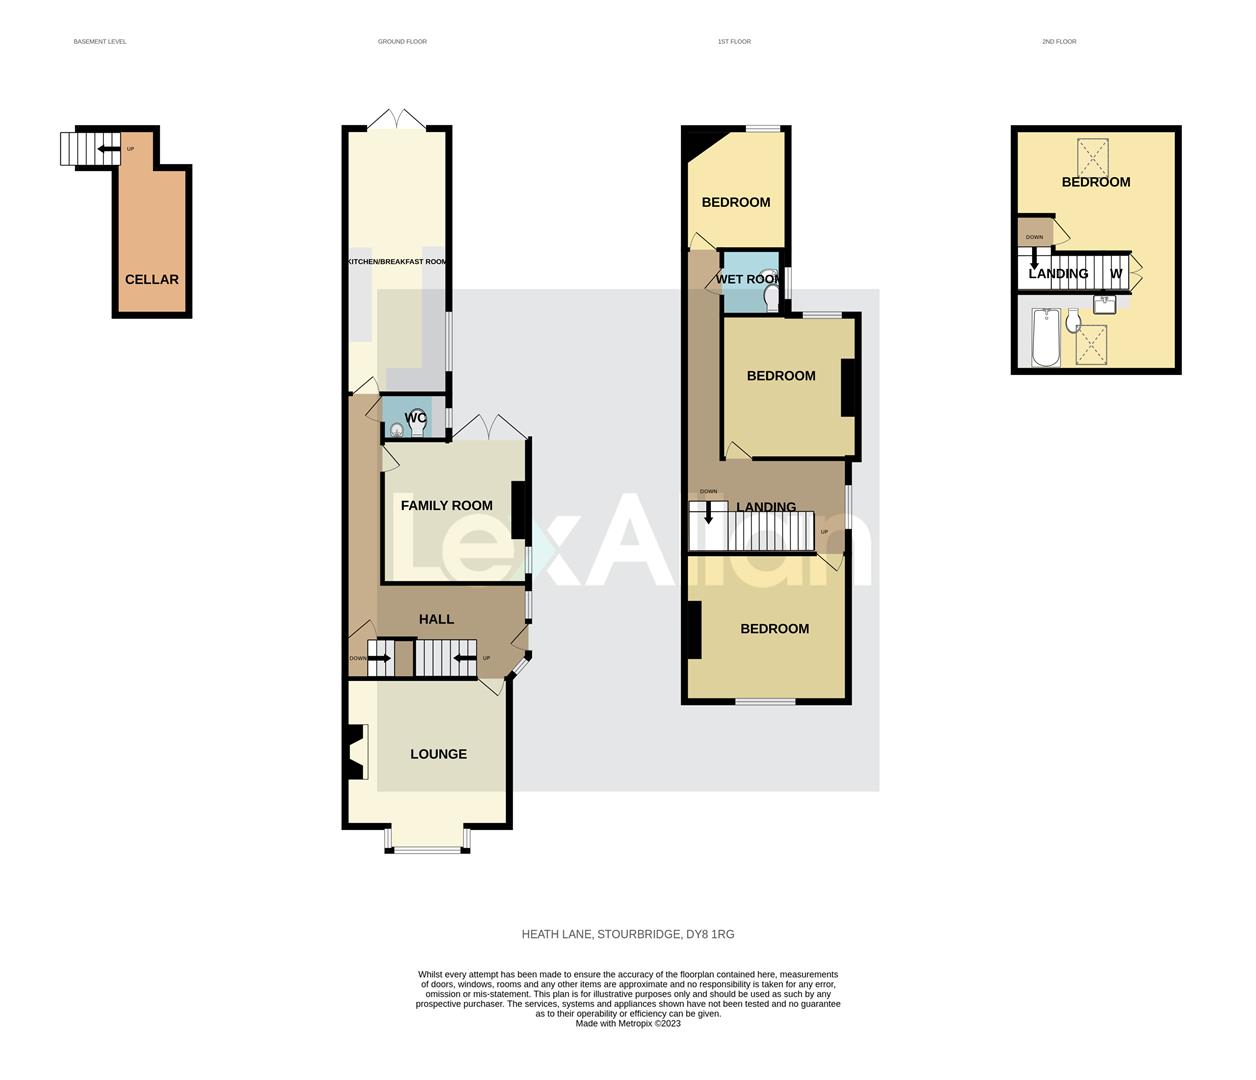 4 bed semi-detached house for sale - Property floorplan